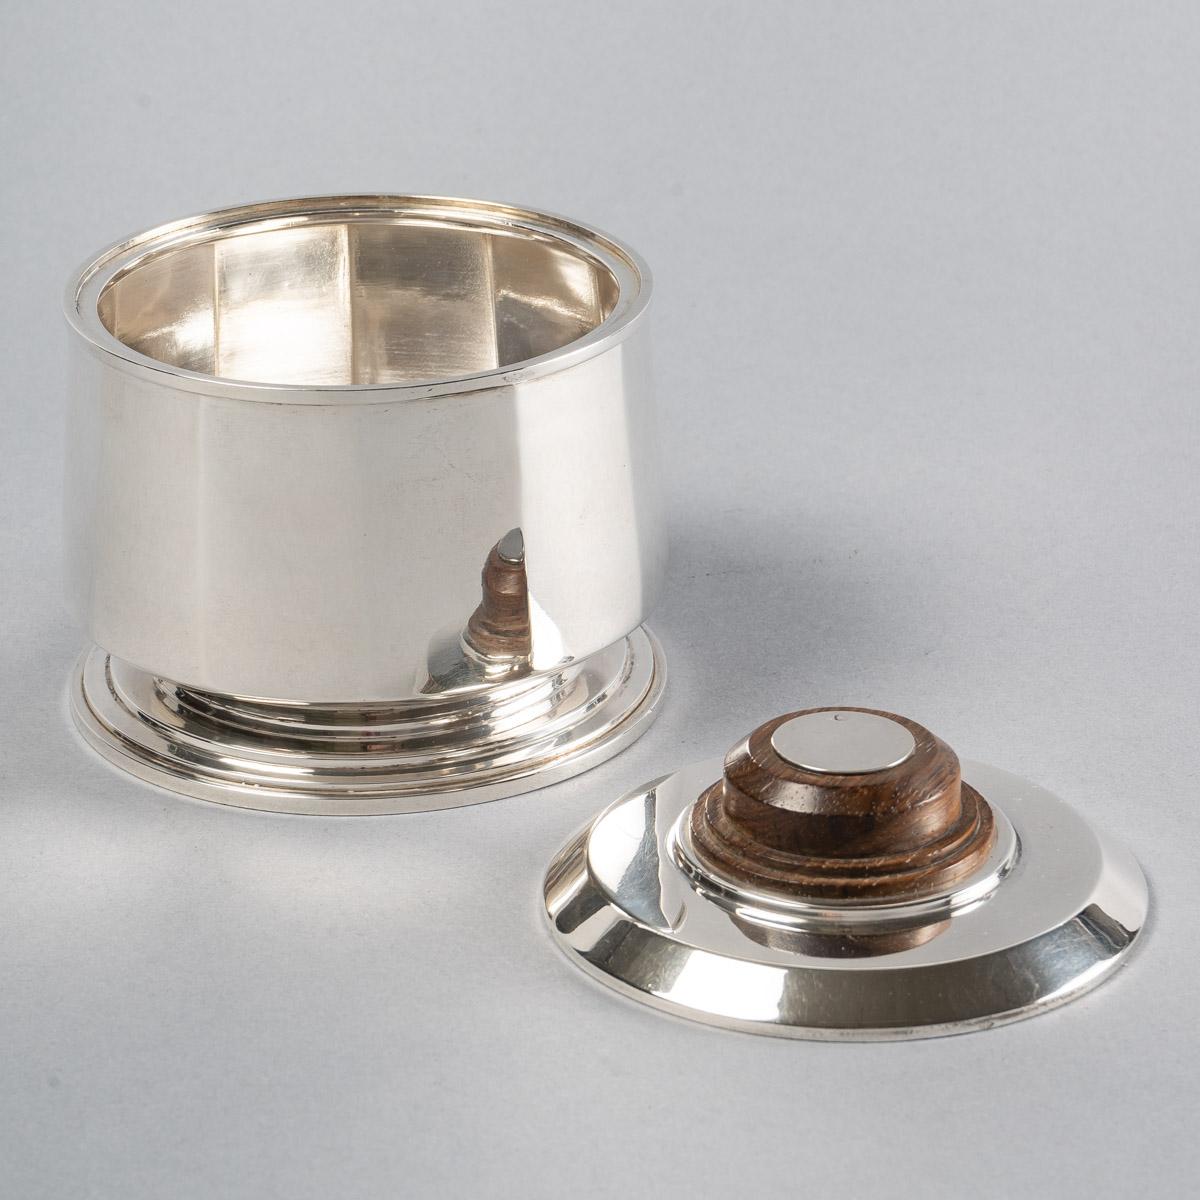 1925 Puiforcat, Tea and Coffee Service in Sterling Silver and Rosewood For Sale 4